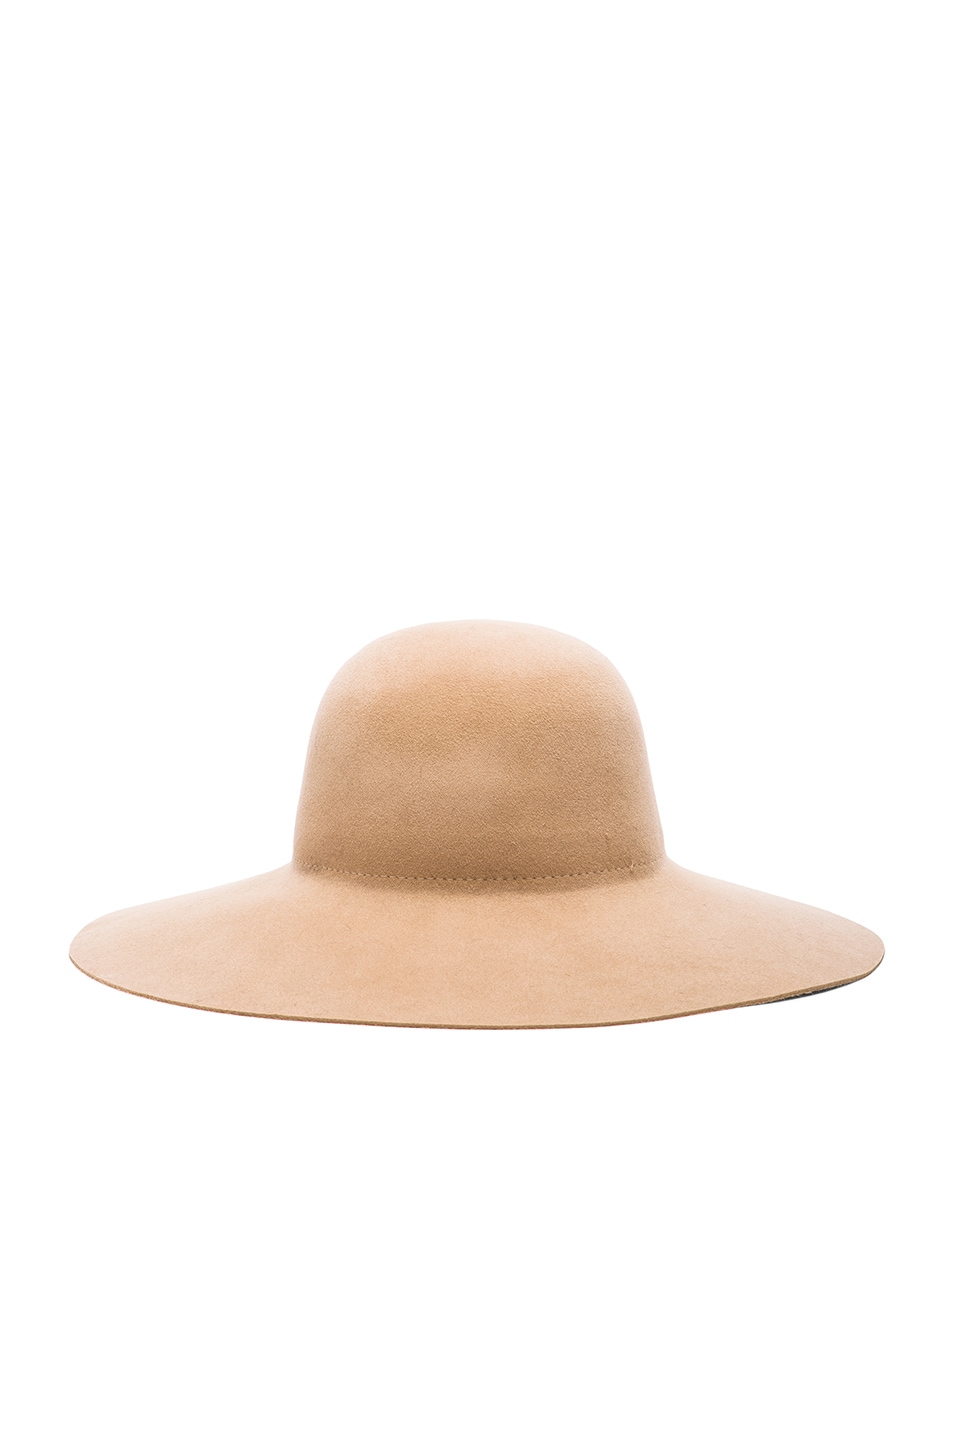 Image 1 of Ryan Roche Wool Suede Hat in Camel Suede